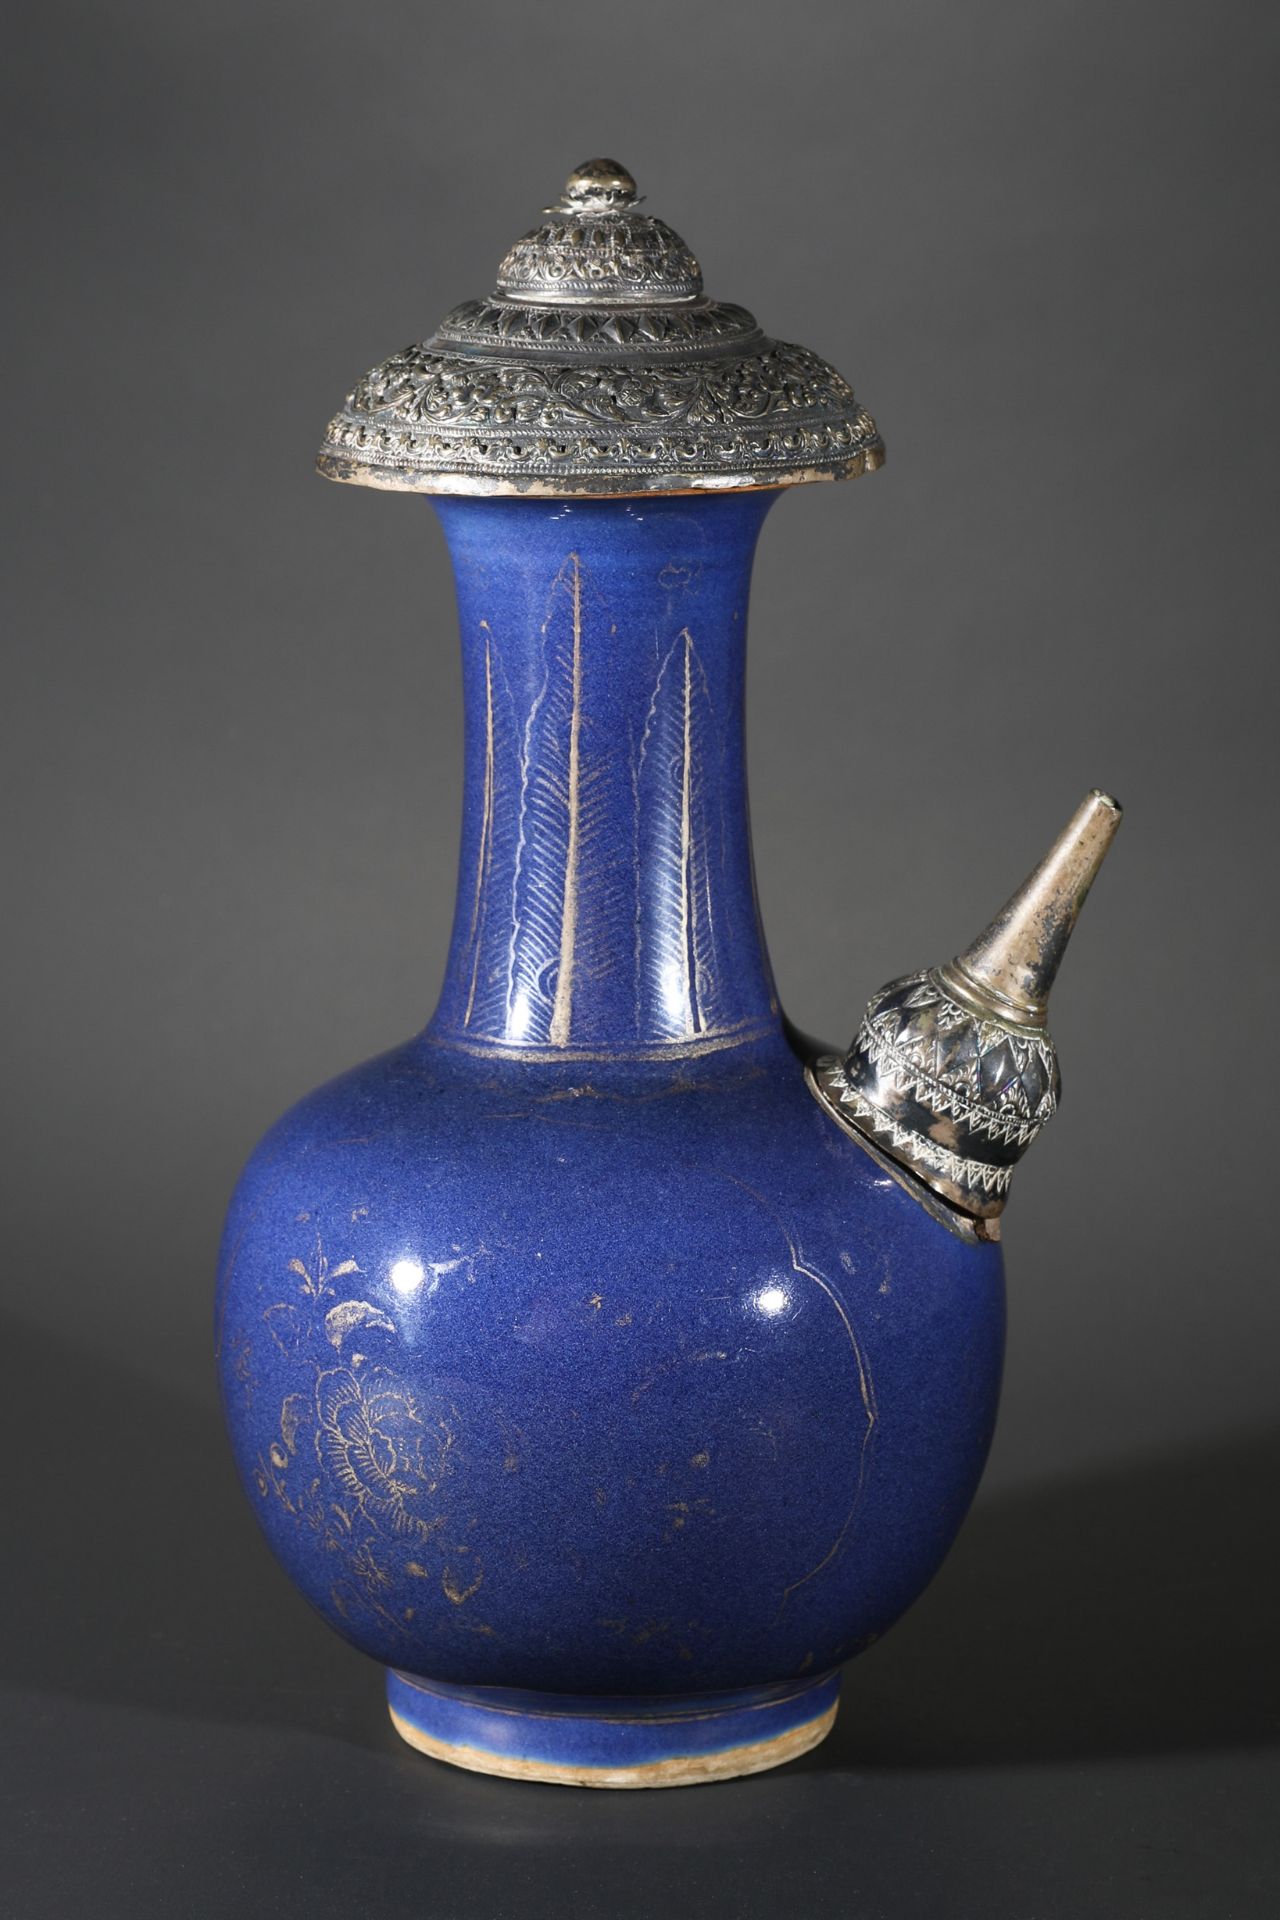 Kendi, Kangxi Period (1654-1722), powder blue with gold painting and silver mount